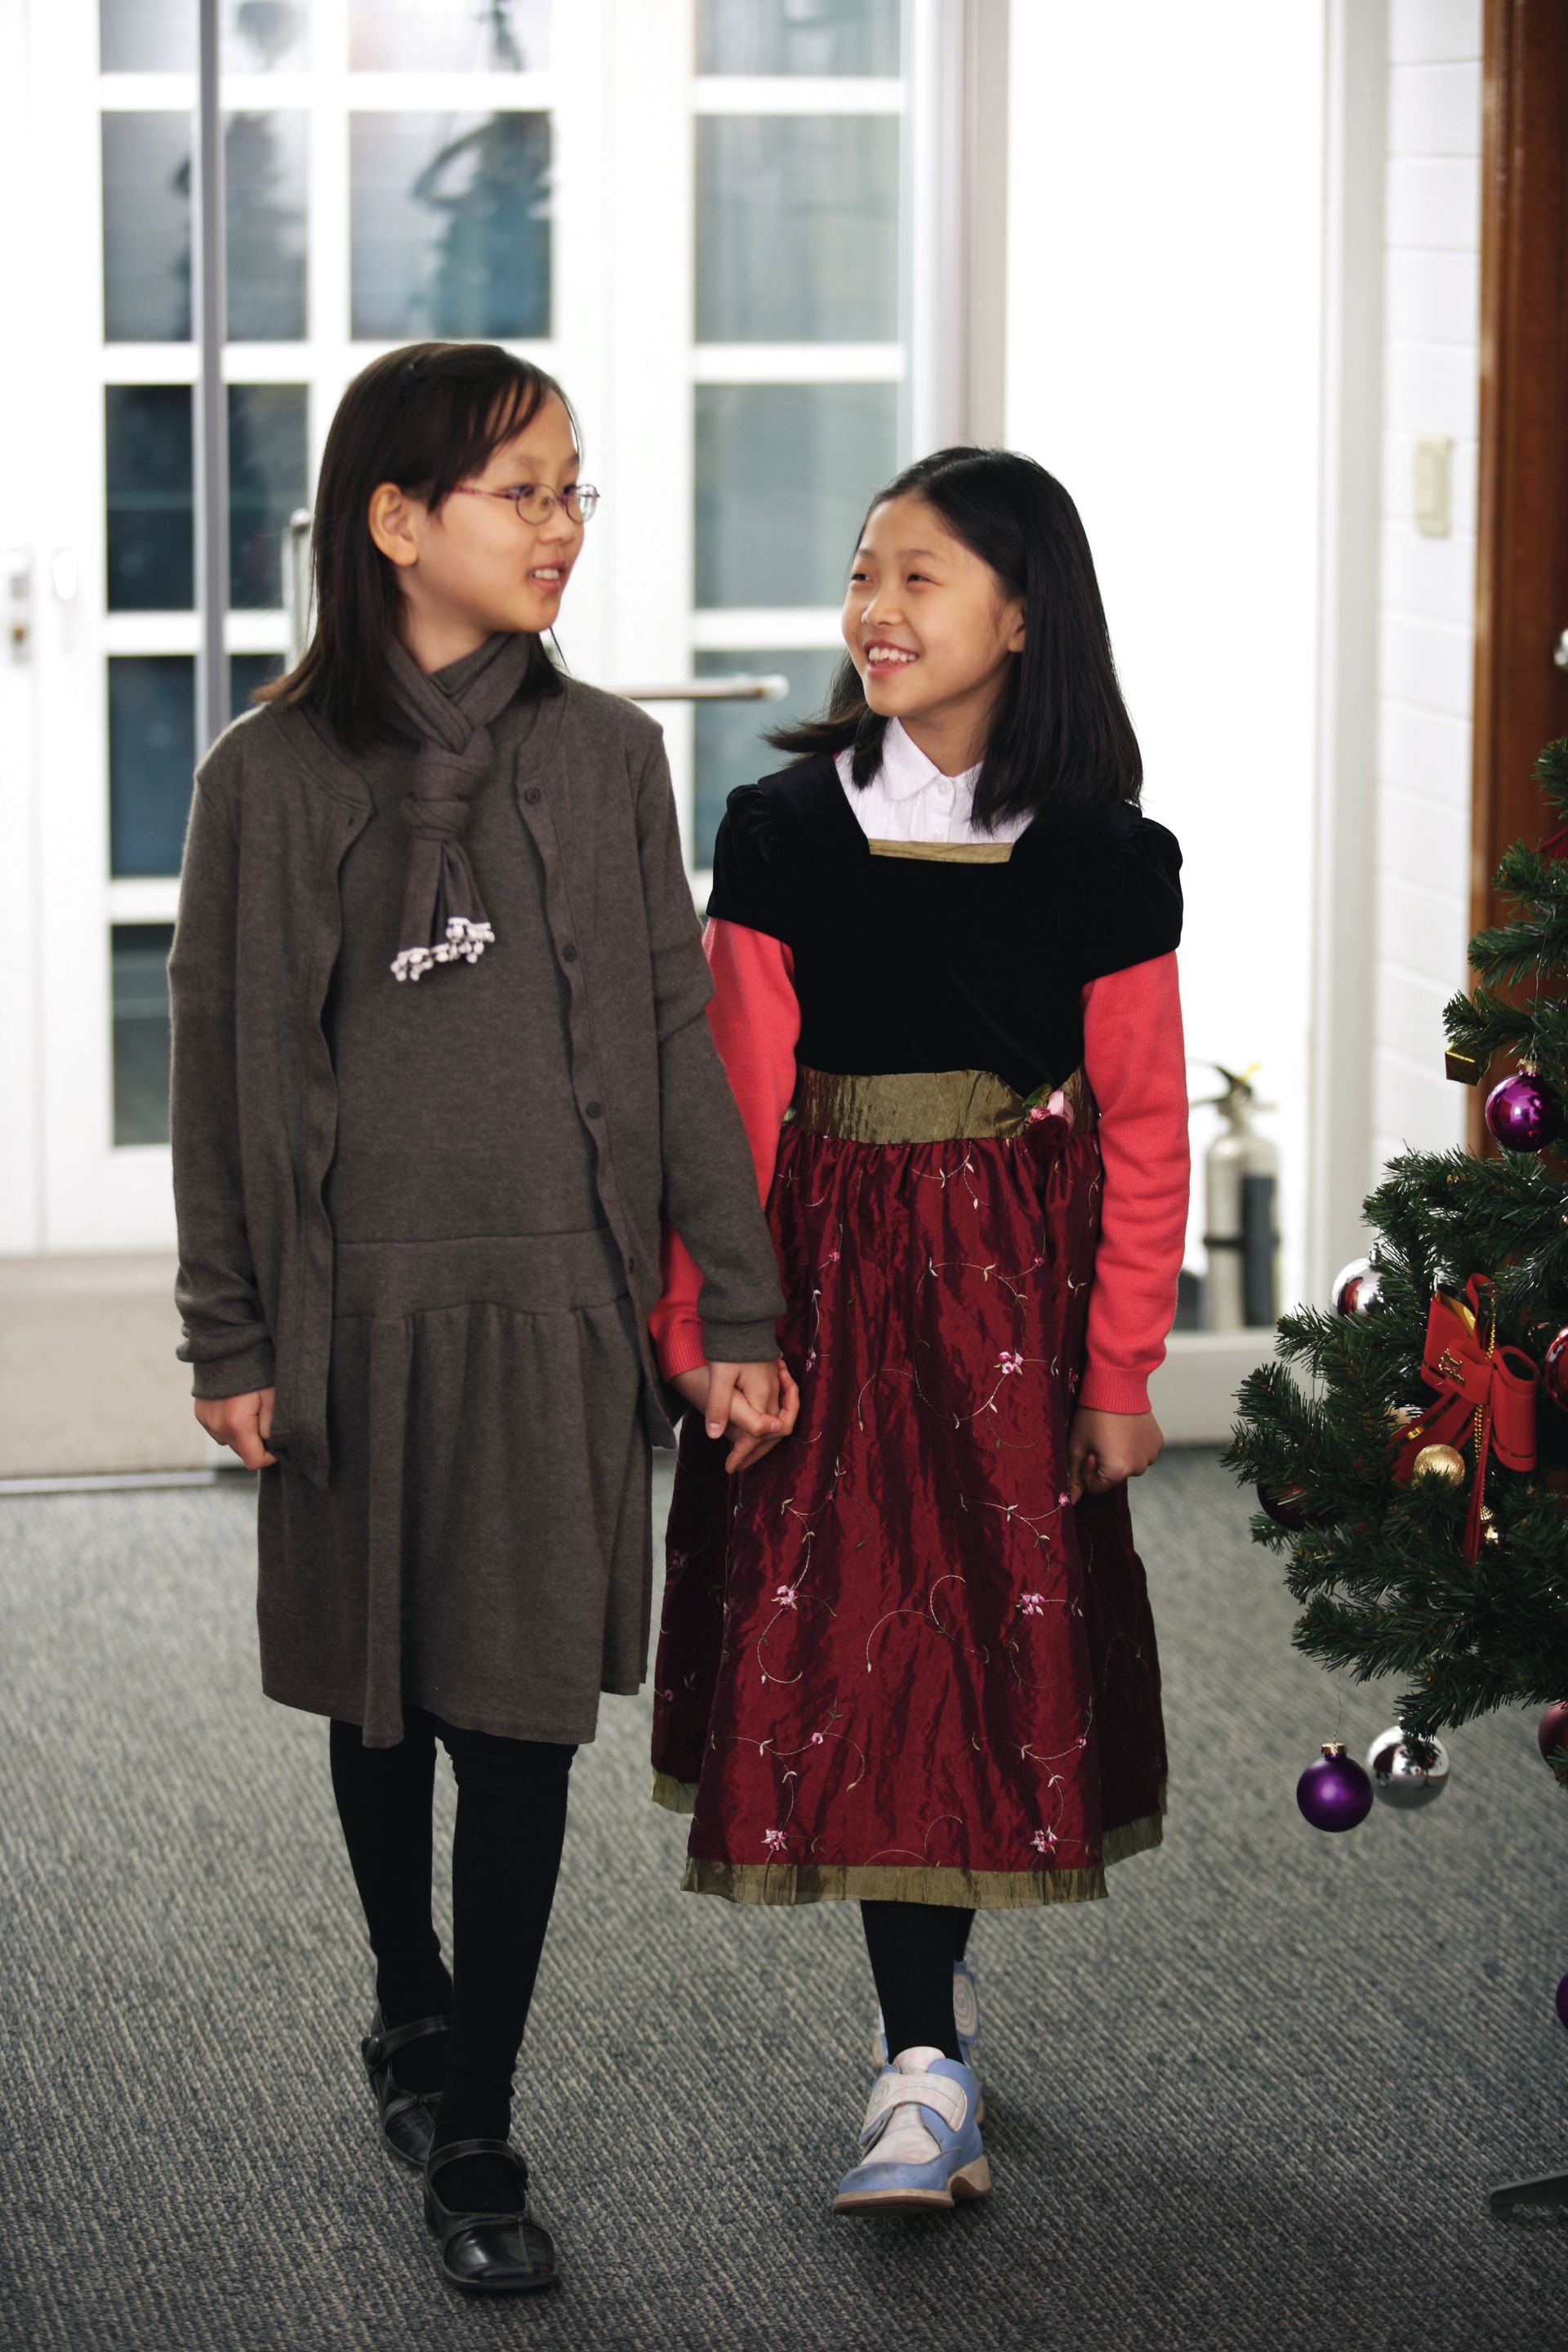 Two sisters in Christmas dresses attend church at Christmastime.